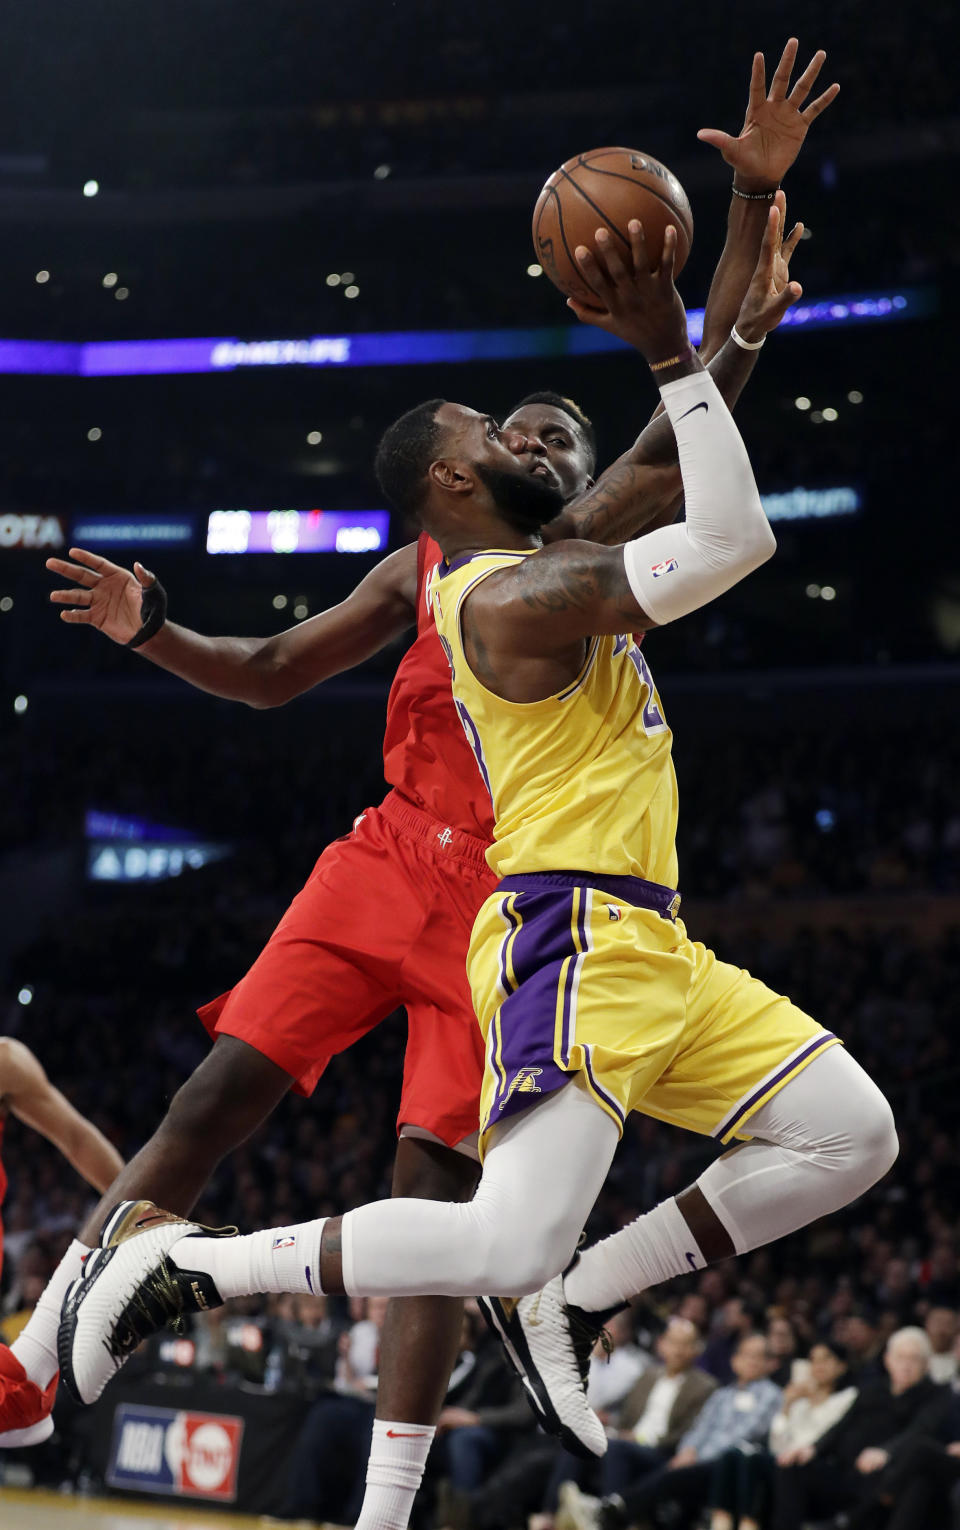 Los Angeles Lakers' LeBron James, front, drives to the basket as Houston Rockets' Clint Capela defends during the first half of an NBA basketball game Thursday, Feb. 21, 2019, in Los Angeles. (AP Photo/Marcio Jose Sanchez)